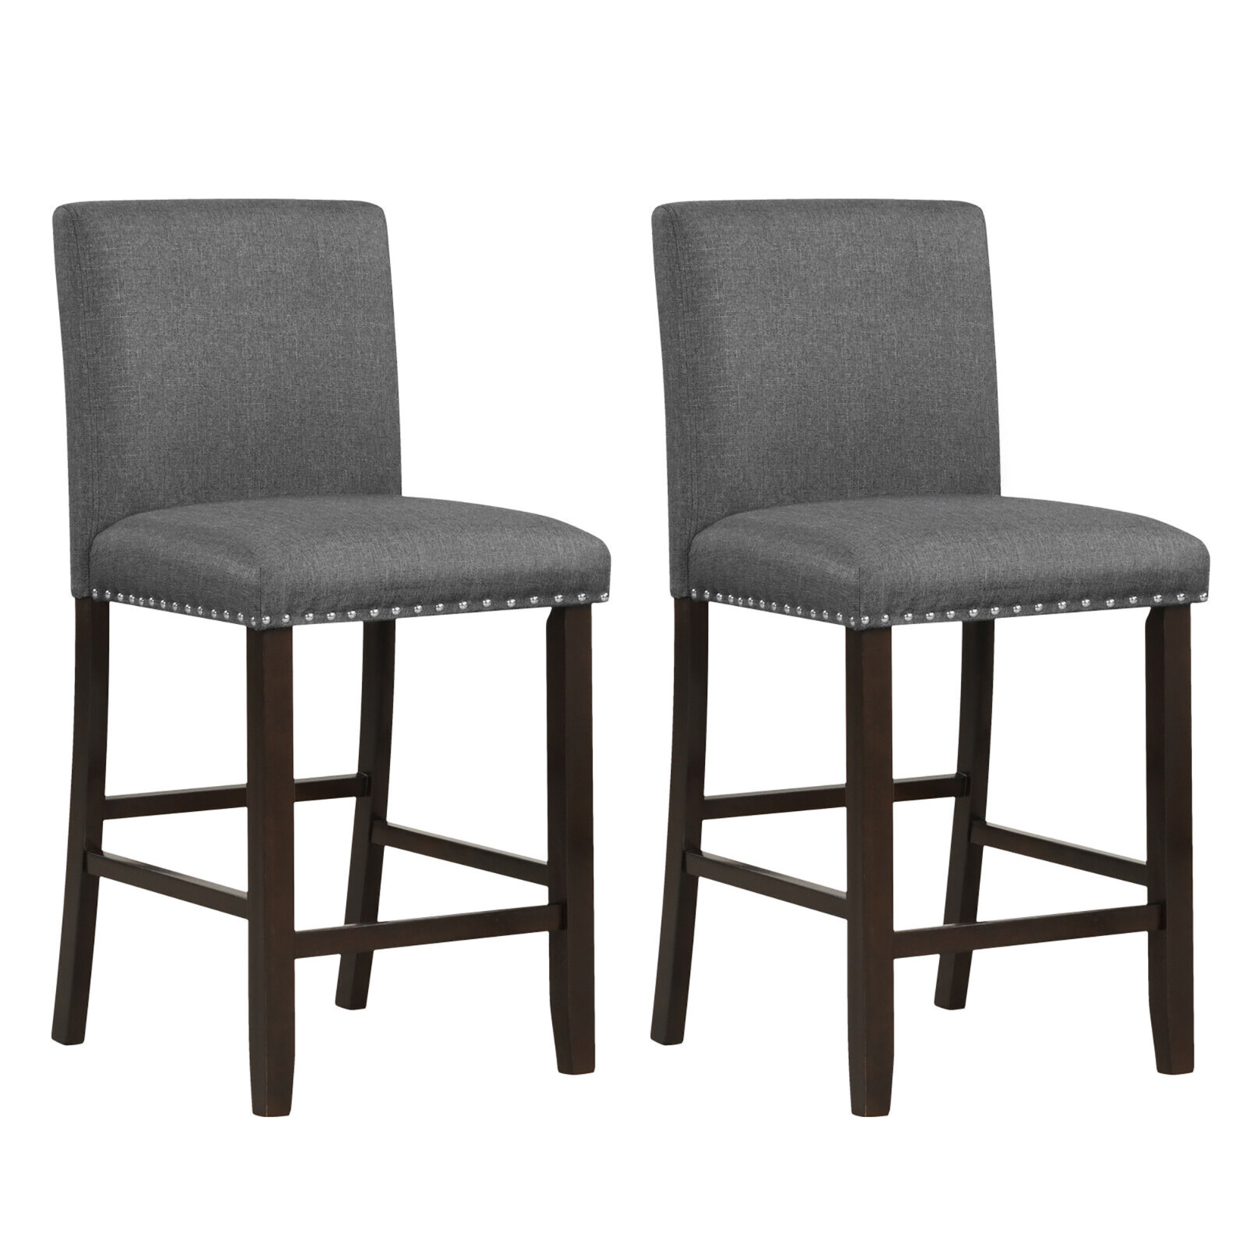 Set Of 2 Bar Stools Linen Fabric Counter Height Chairs For Kitchen Island Grey